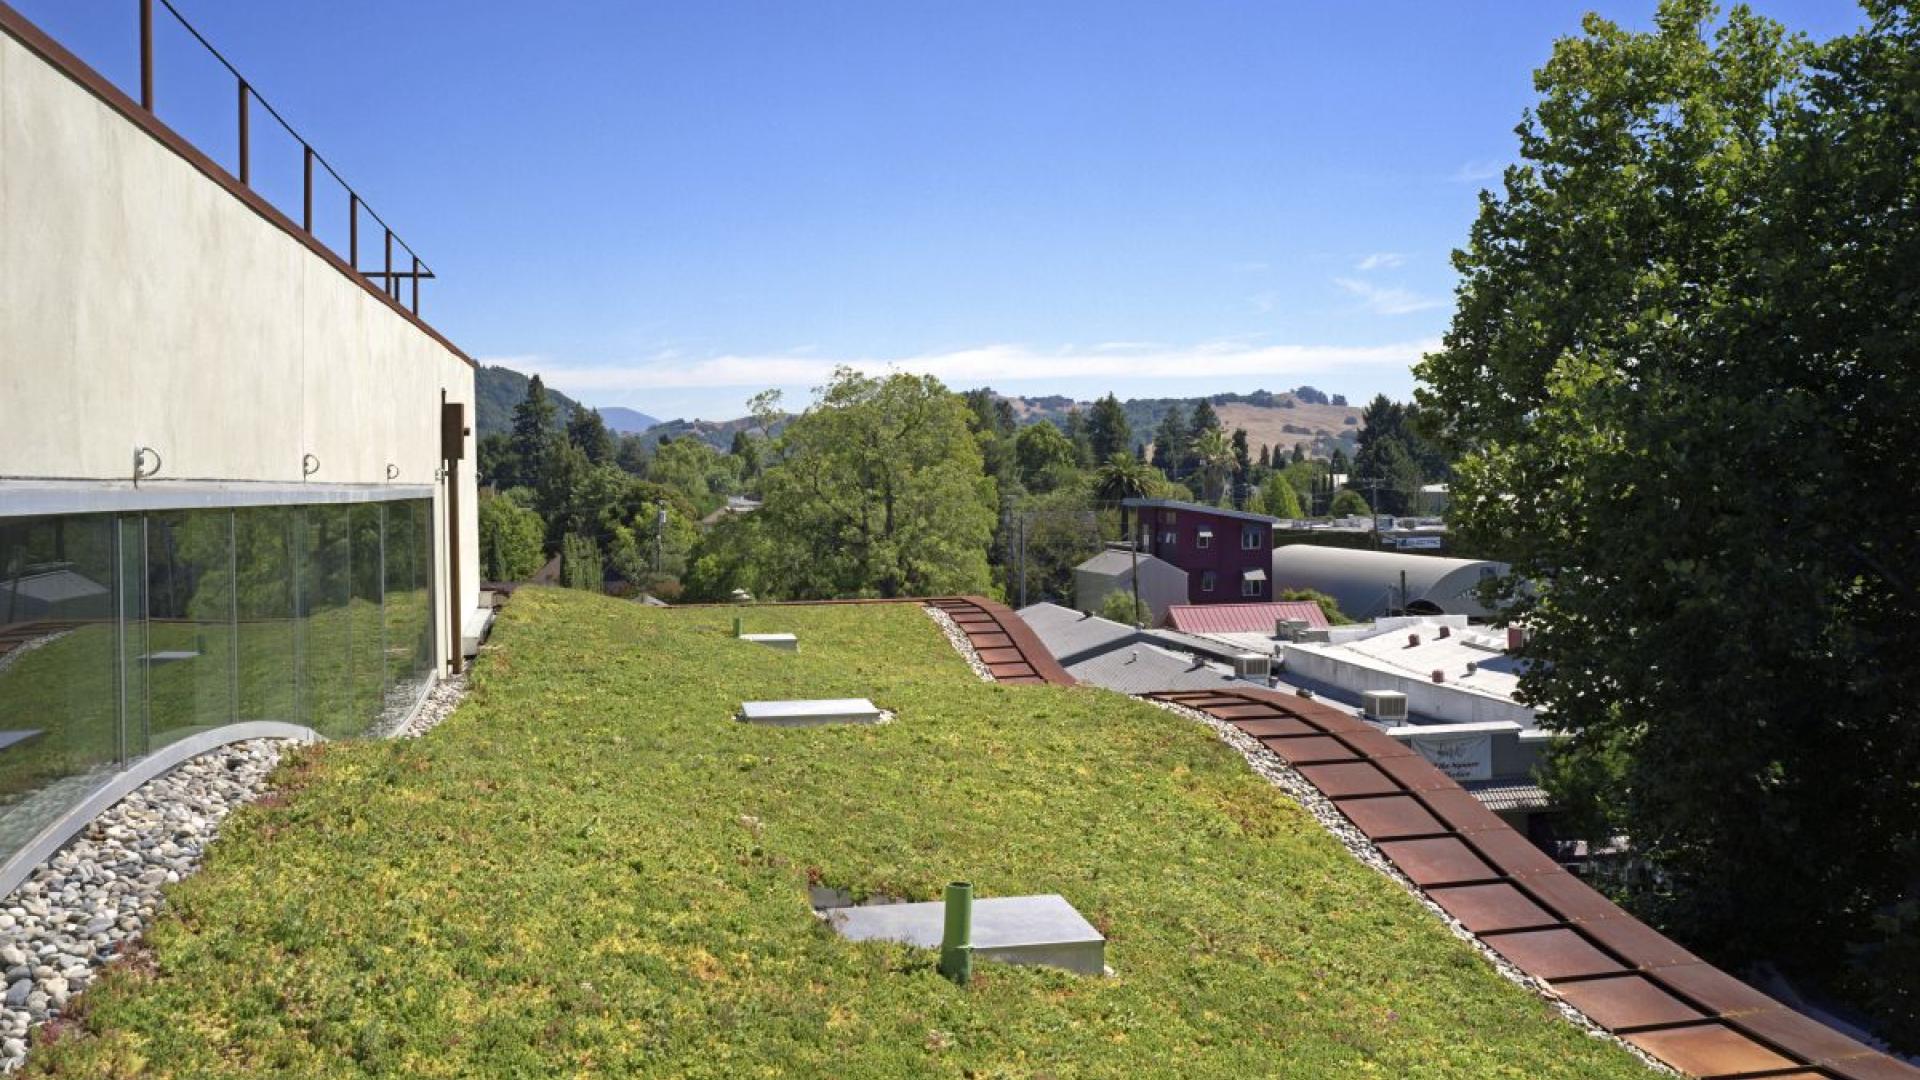 Green Roof at the h2hotel in Healdsburg, California